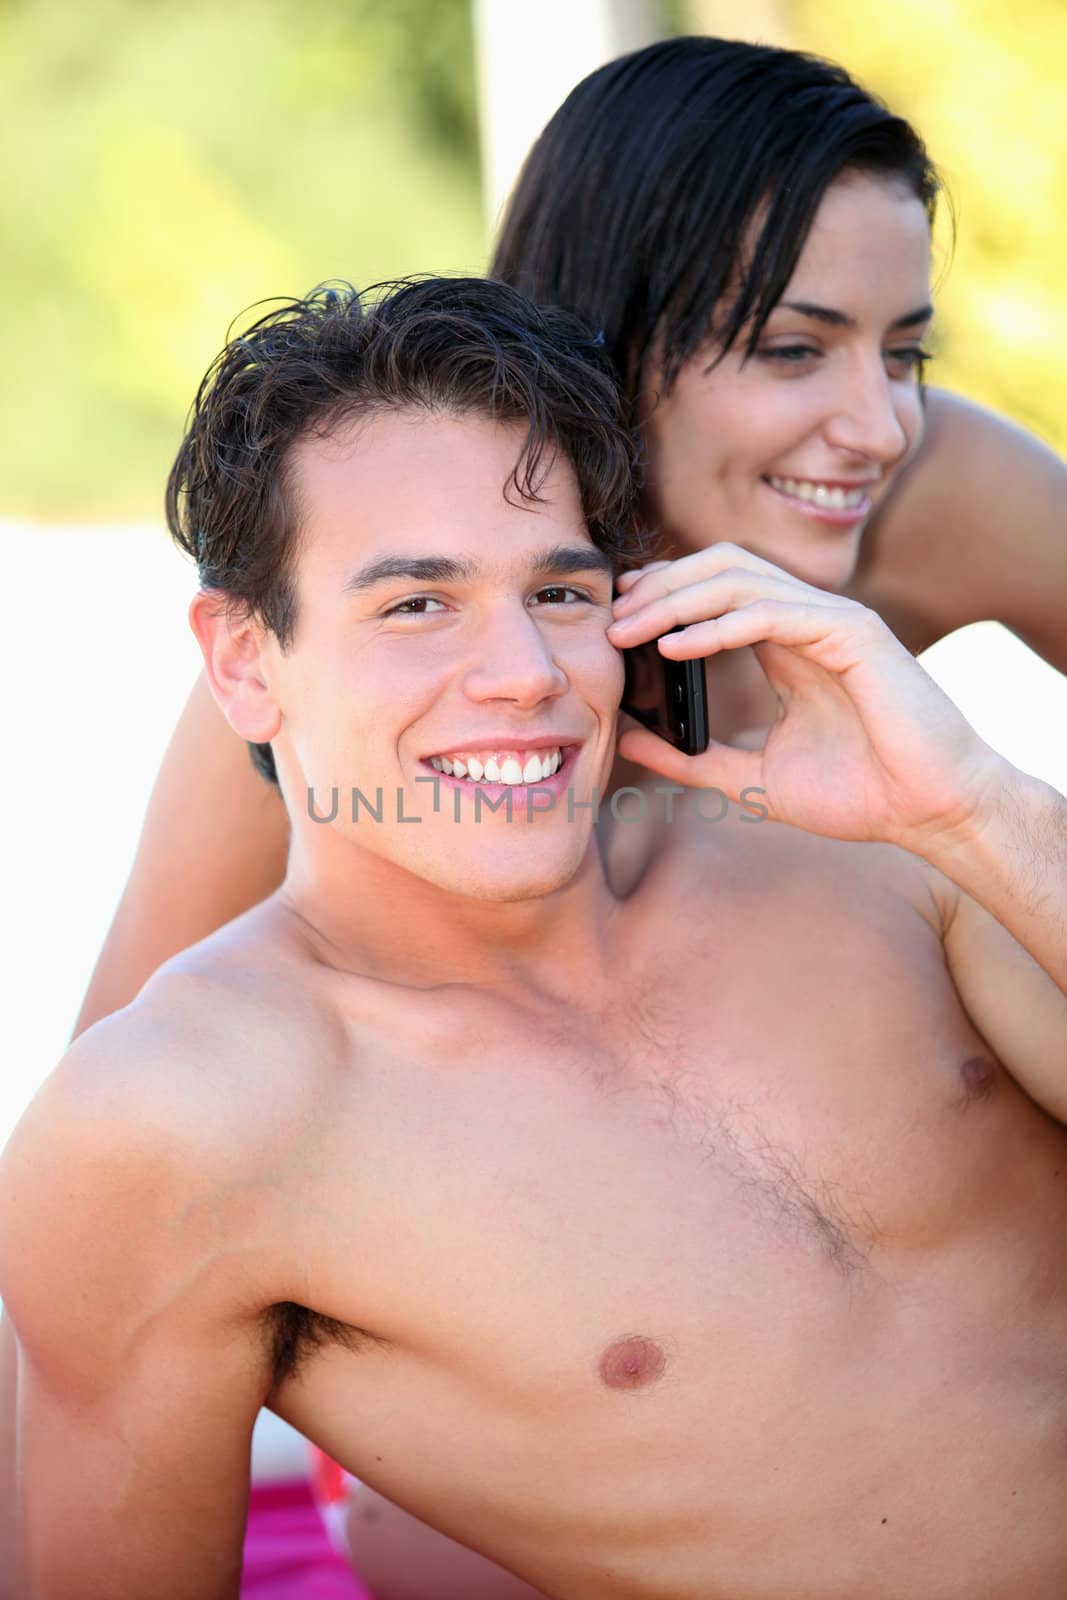 bare-chested boy phoning with girlfriend by his side by phovoir